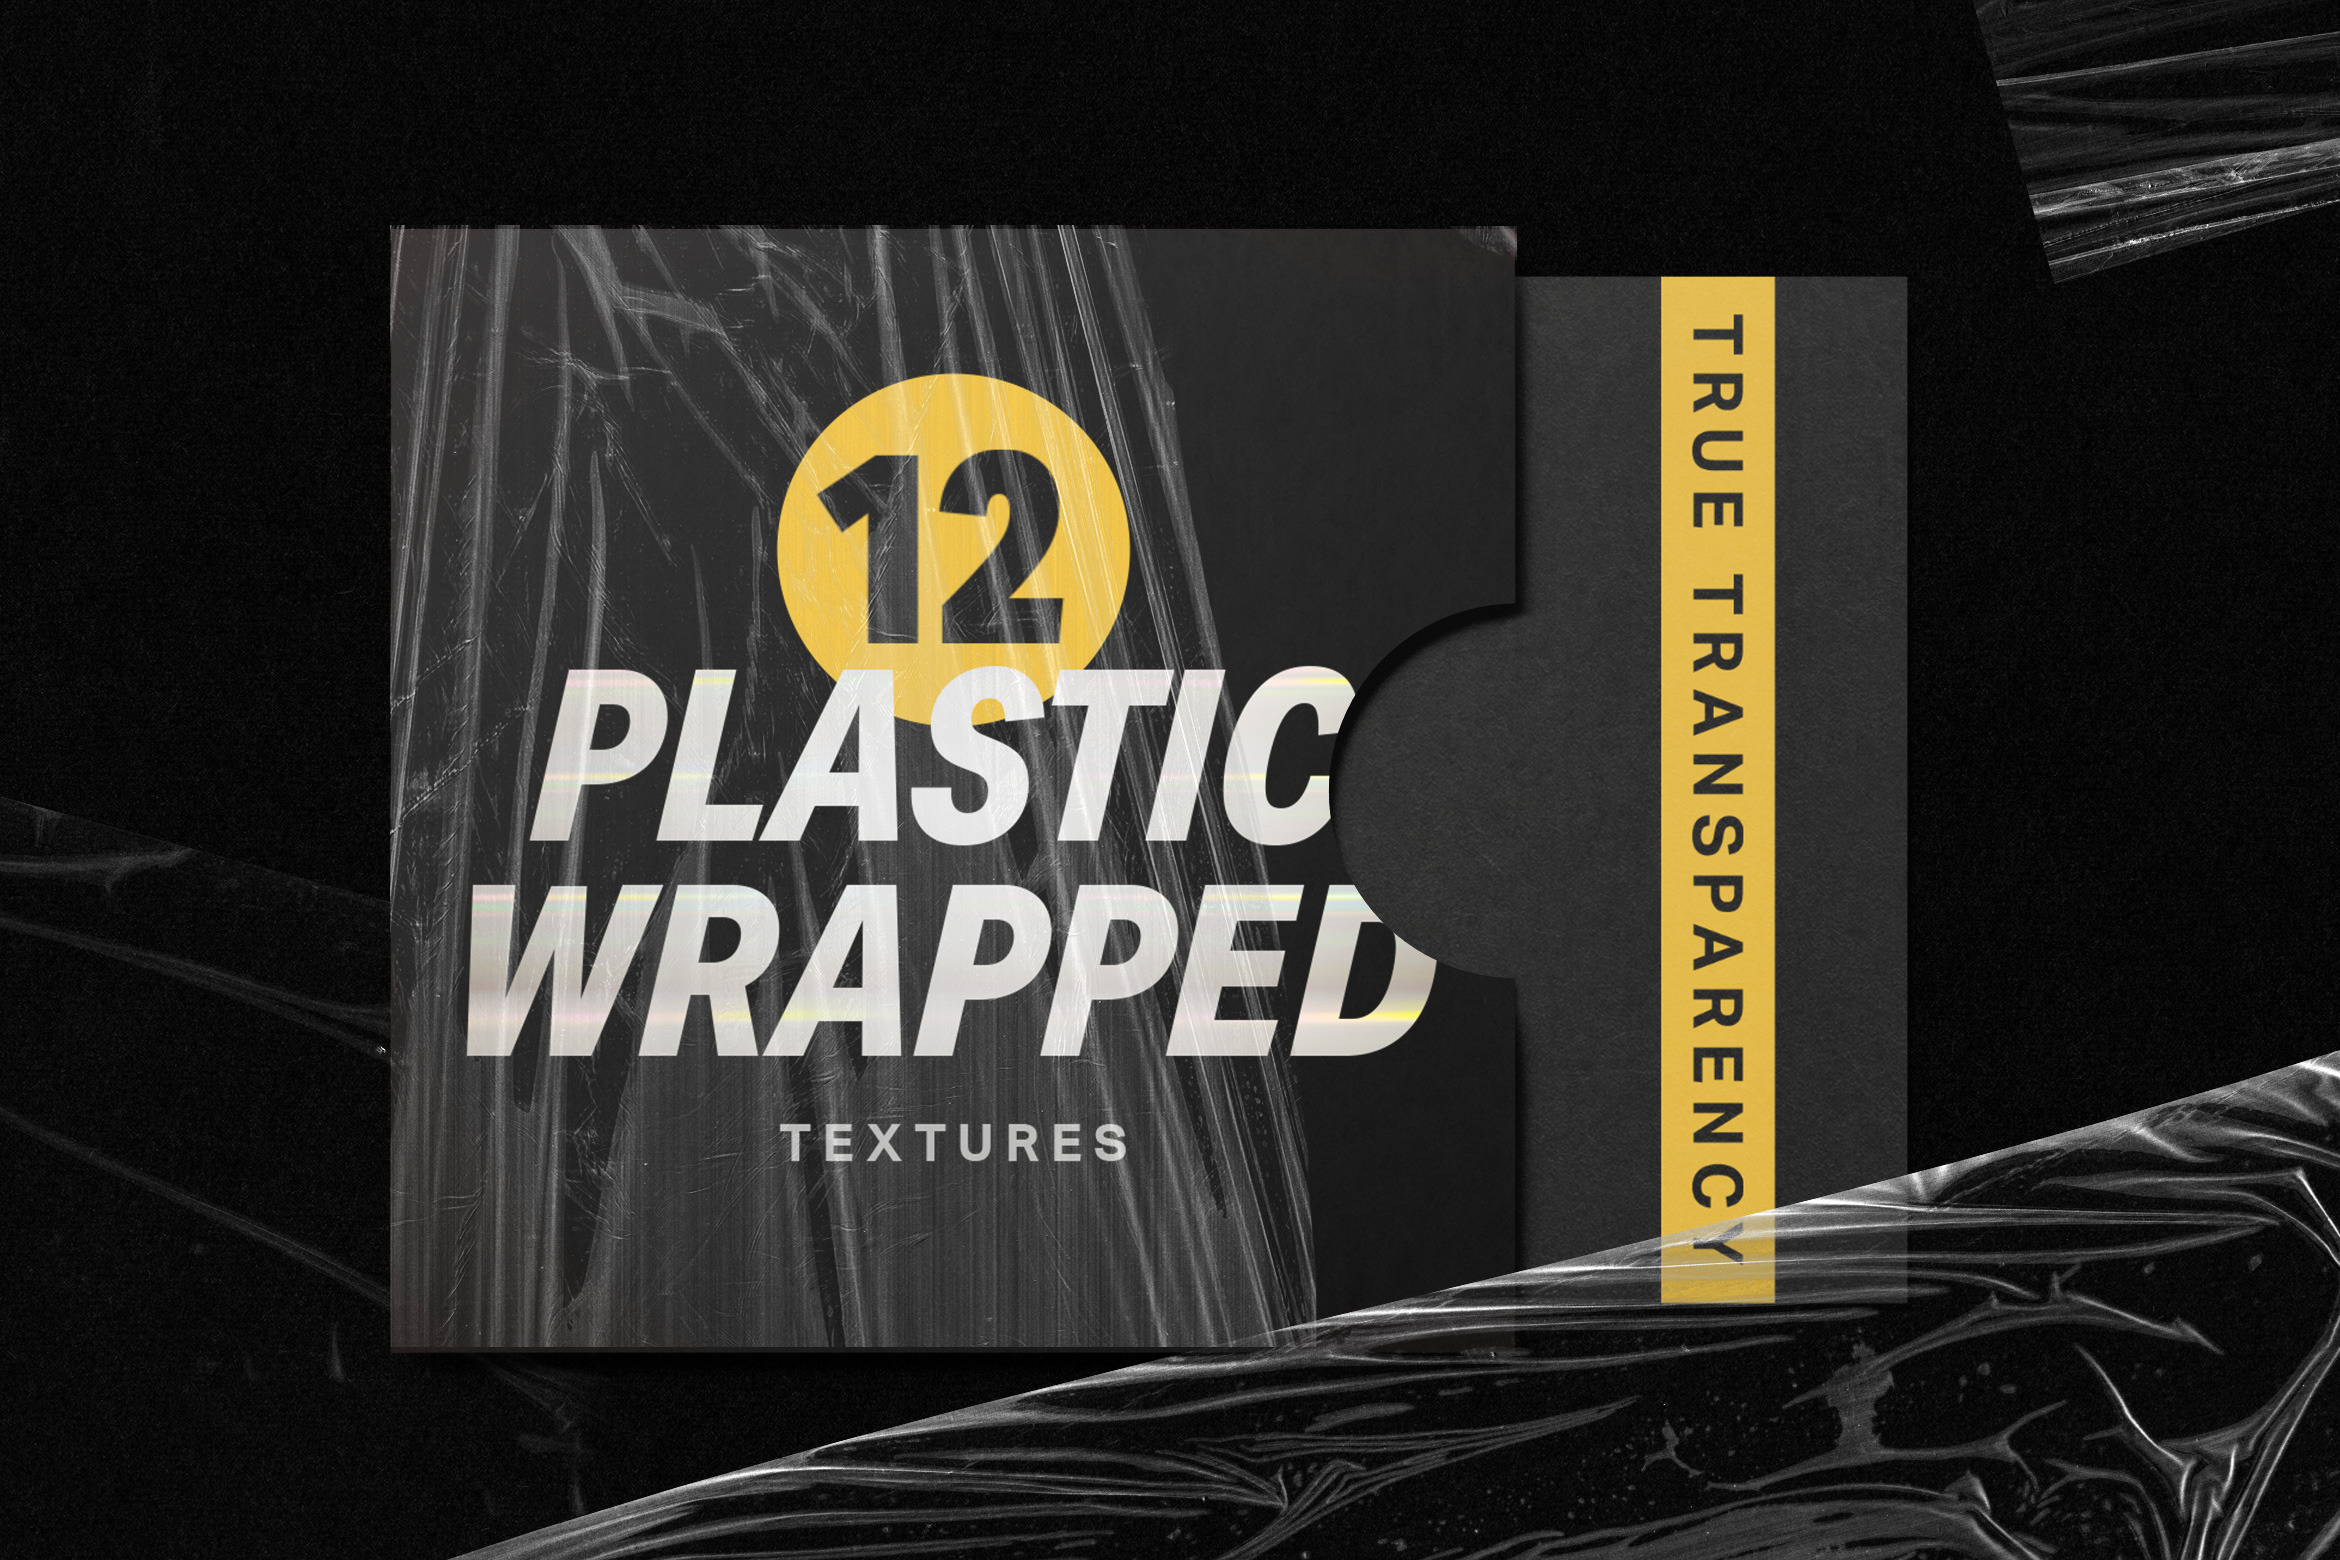 12 Plastic Wrapped Textures A Texture Graphic By Sparklestock 8226